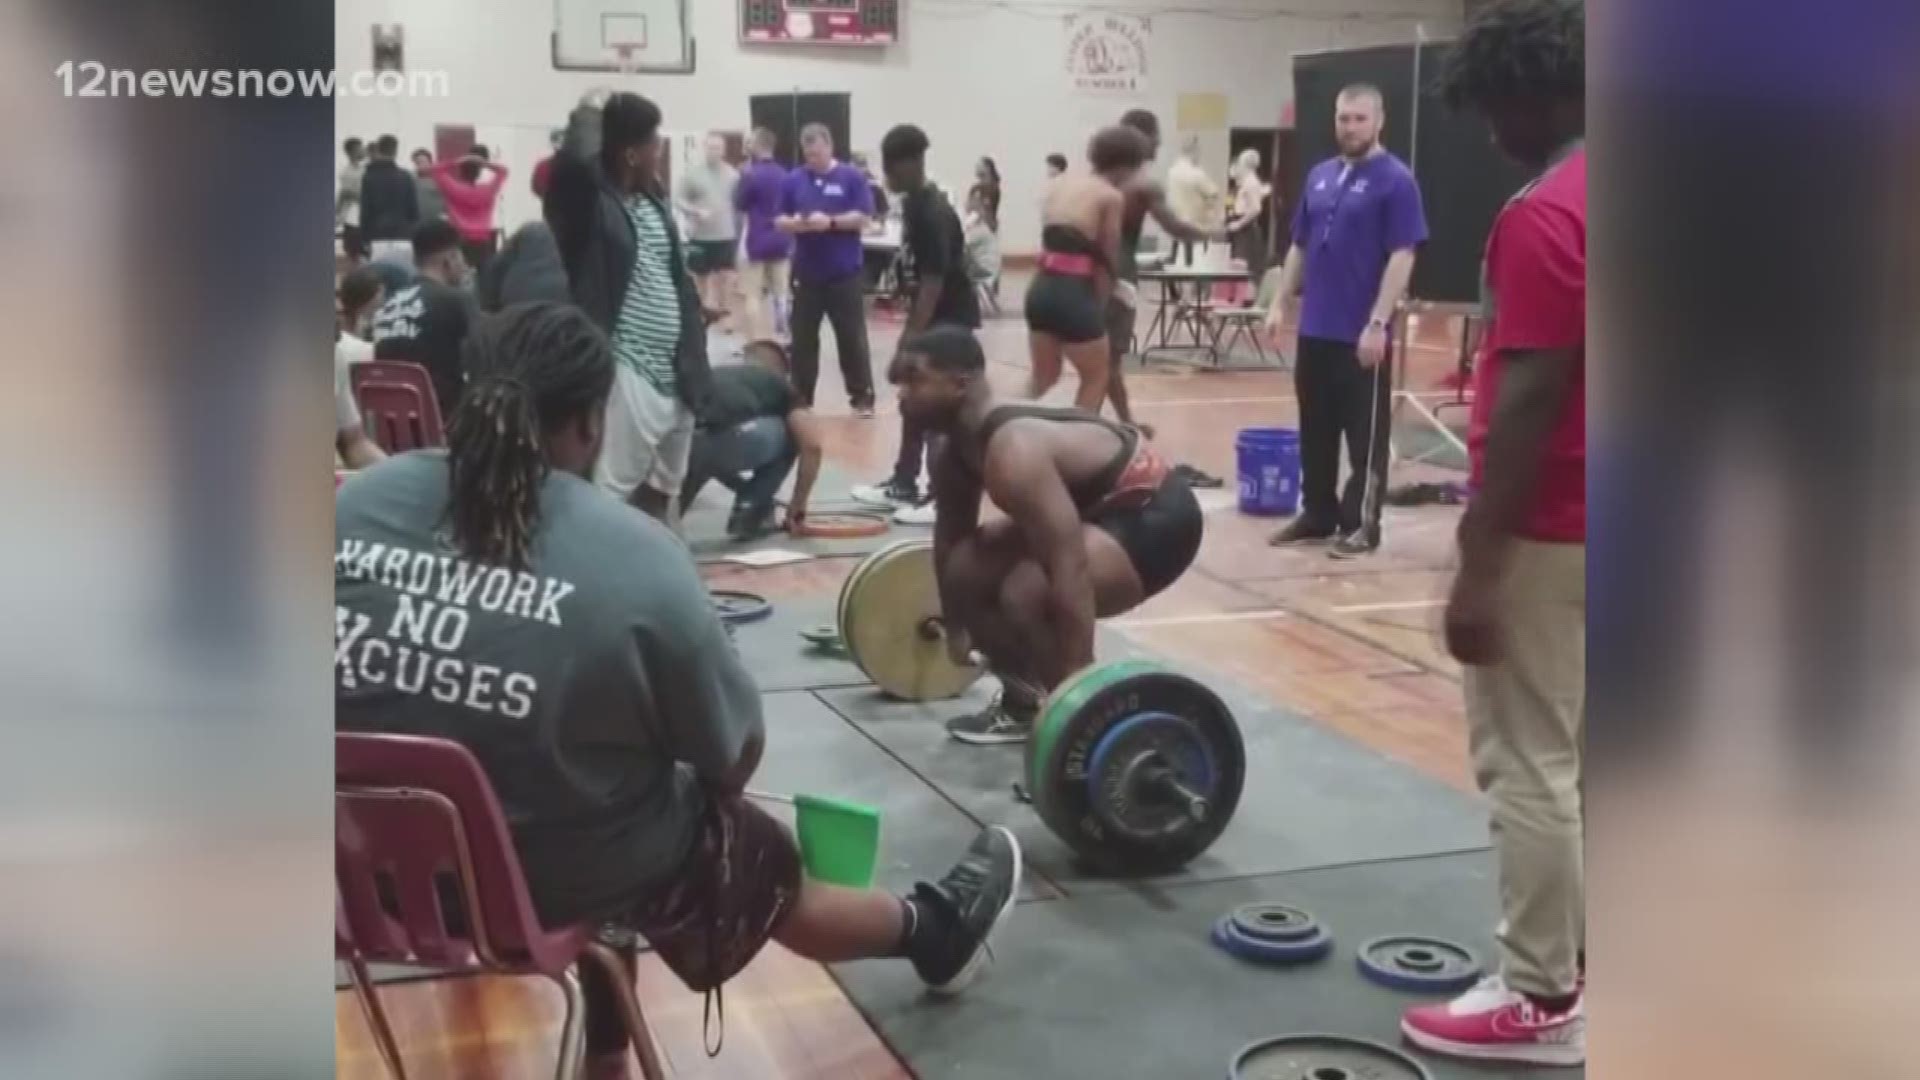 Like father, like son, a few decades ago, Coach Eric Williams was a Newton powerlifter. This year, his son, an Eagle senior is following in his dad's footsteps in hopes of bringing home a state title.